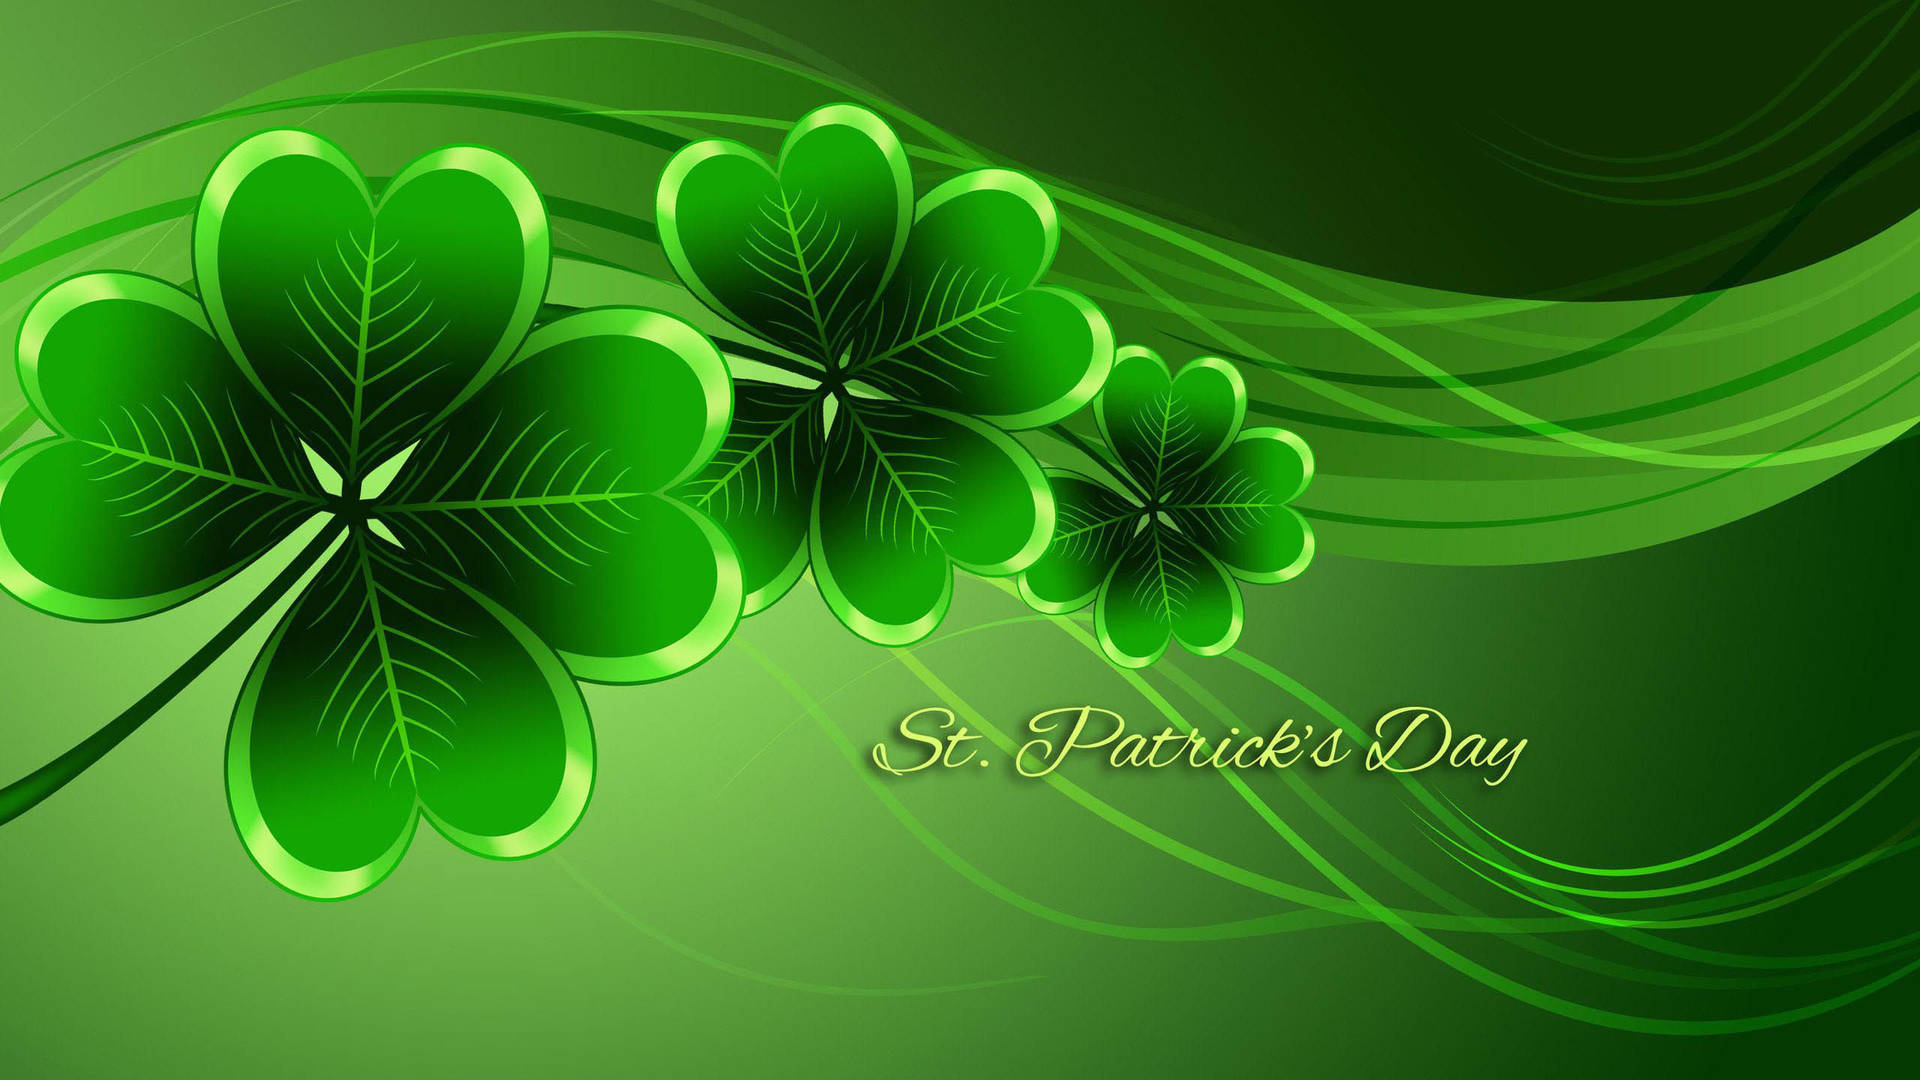 Saint Patrick’s Day With A Clover Wave